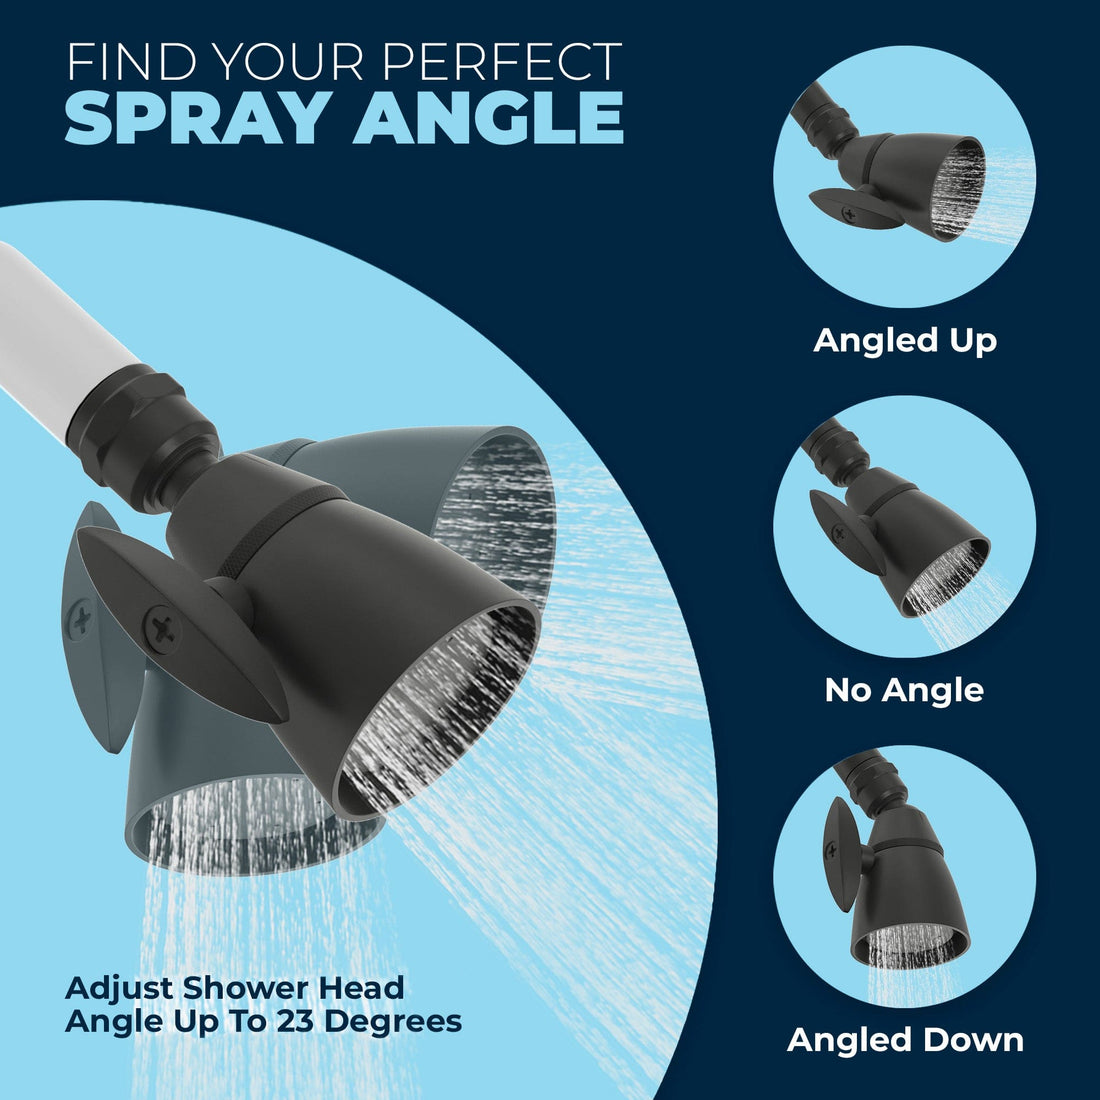 Adjustable Angle Fixed Small Shower Head Adjusts Angle Up to 23 Degrees Matte Black / 2.5 - The Shower Head Store